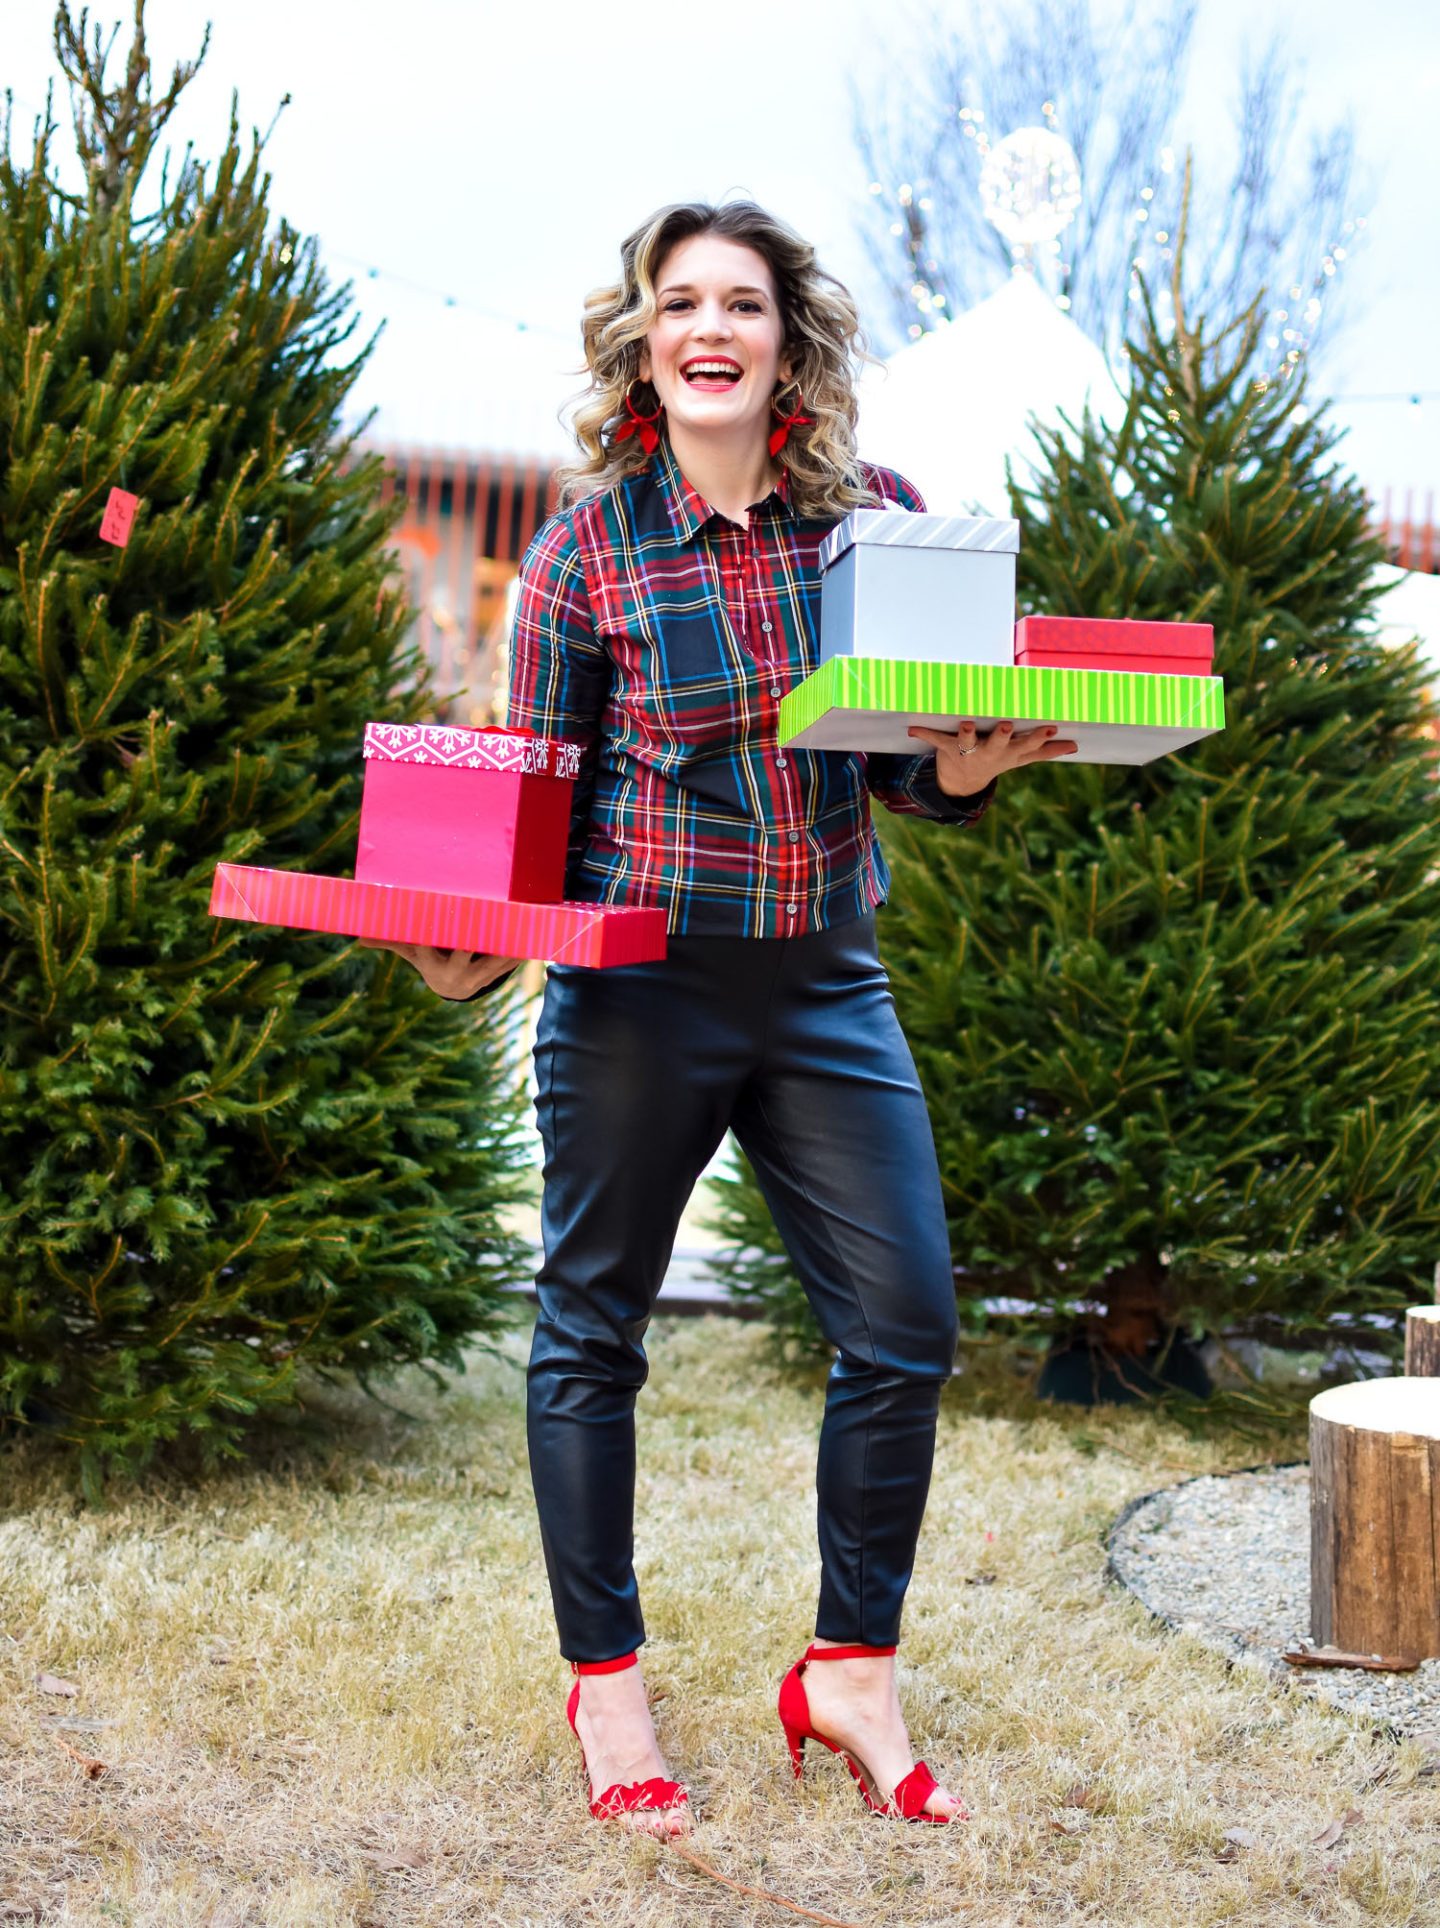 Holiday Outfit Idea - Versatile Stewart Plaid Shirt and Leather Leggings